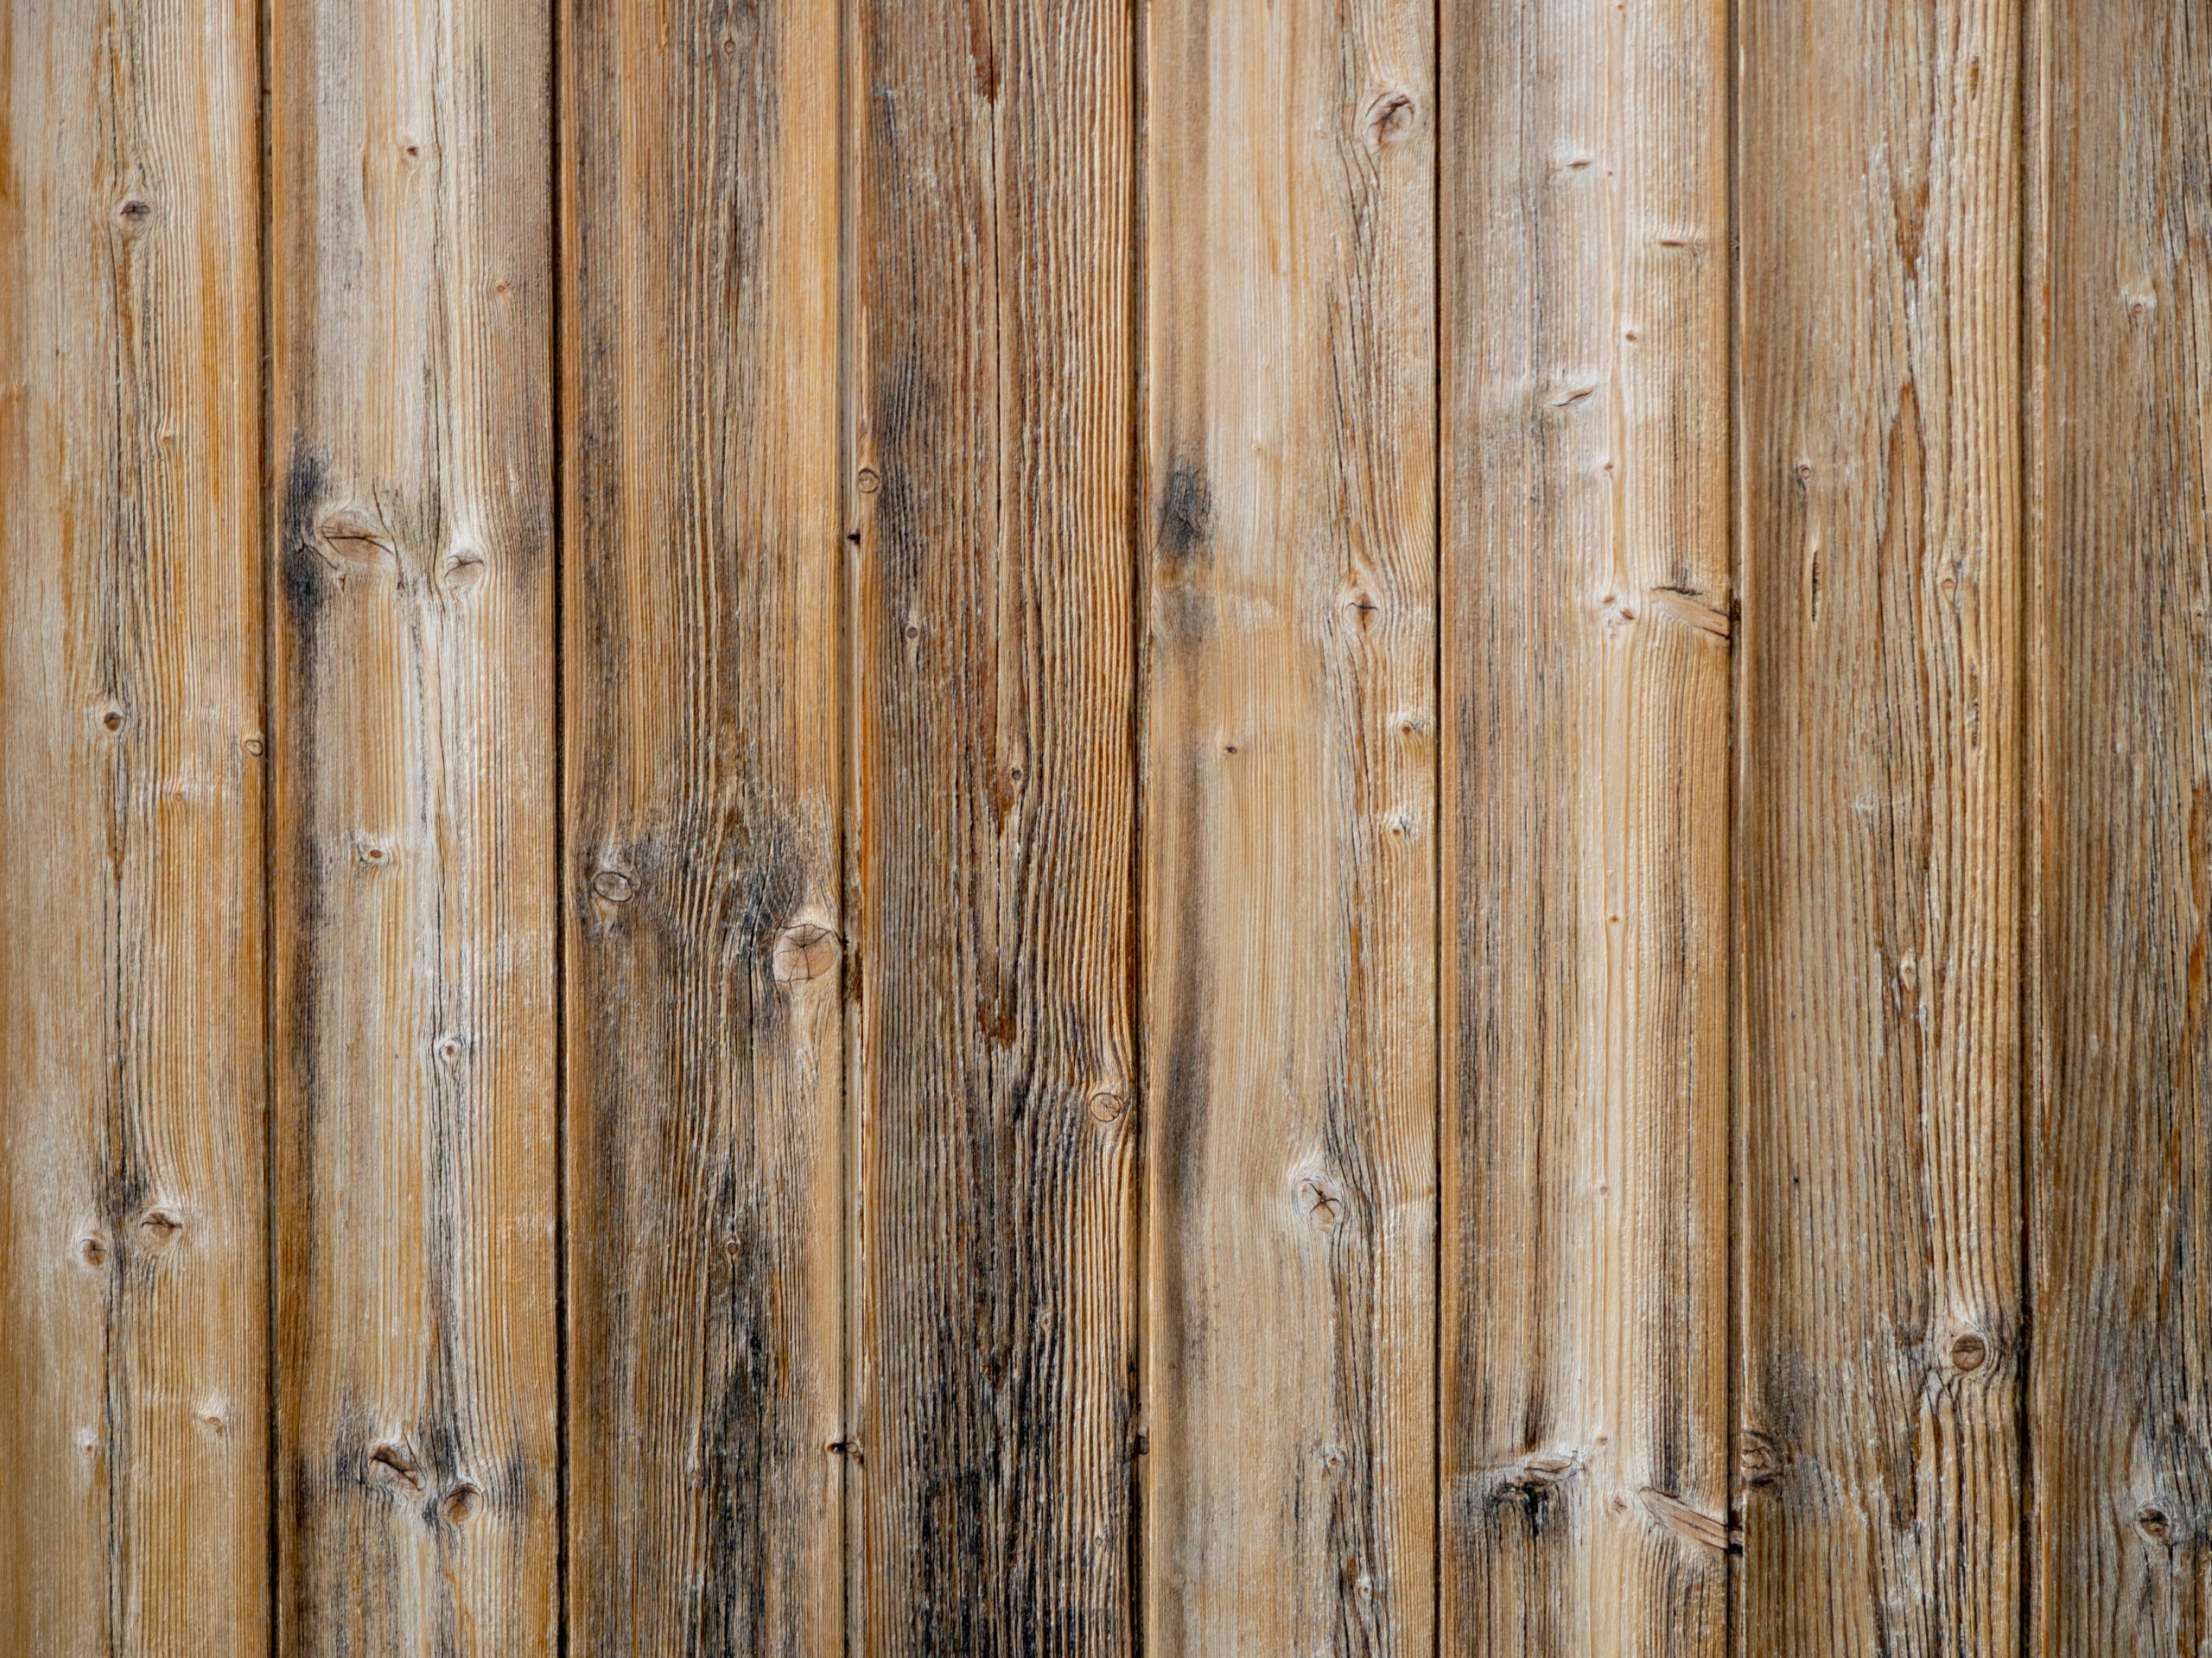 Wood slats background,old exterior cladding with vertical planks.